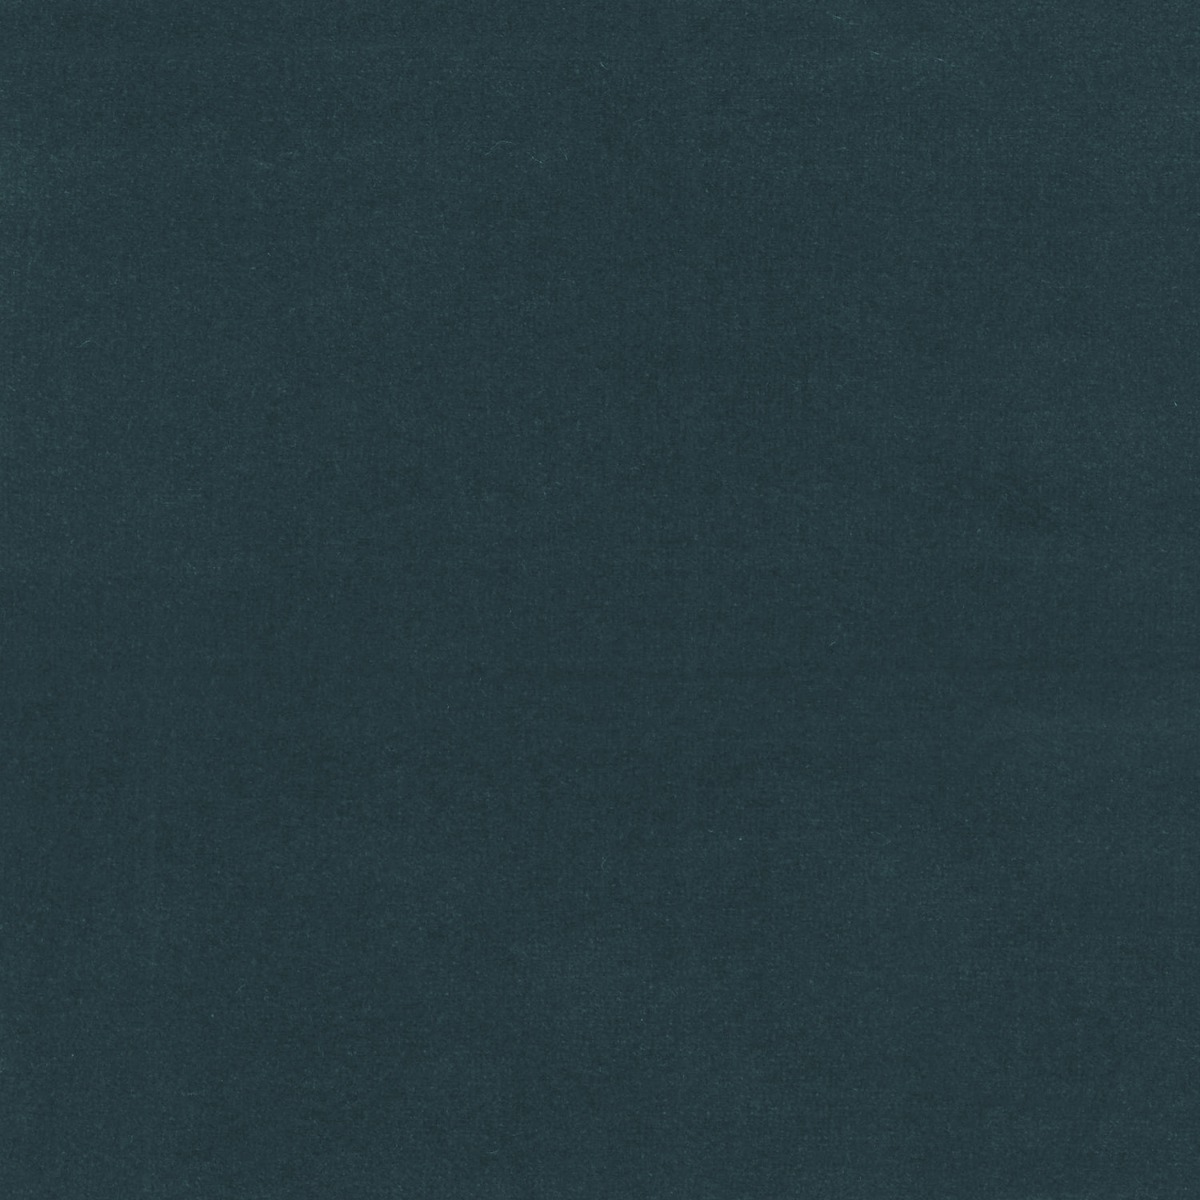 E-DRAPVEL/TEAL - Light Weight Fabric Suitable For Drapery